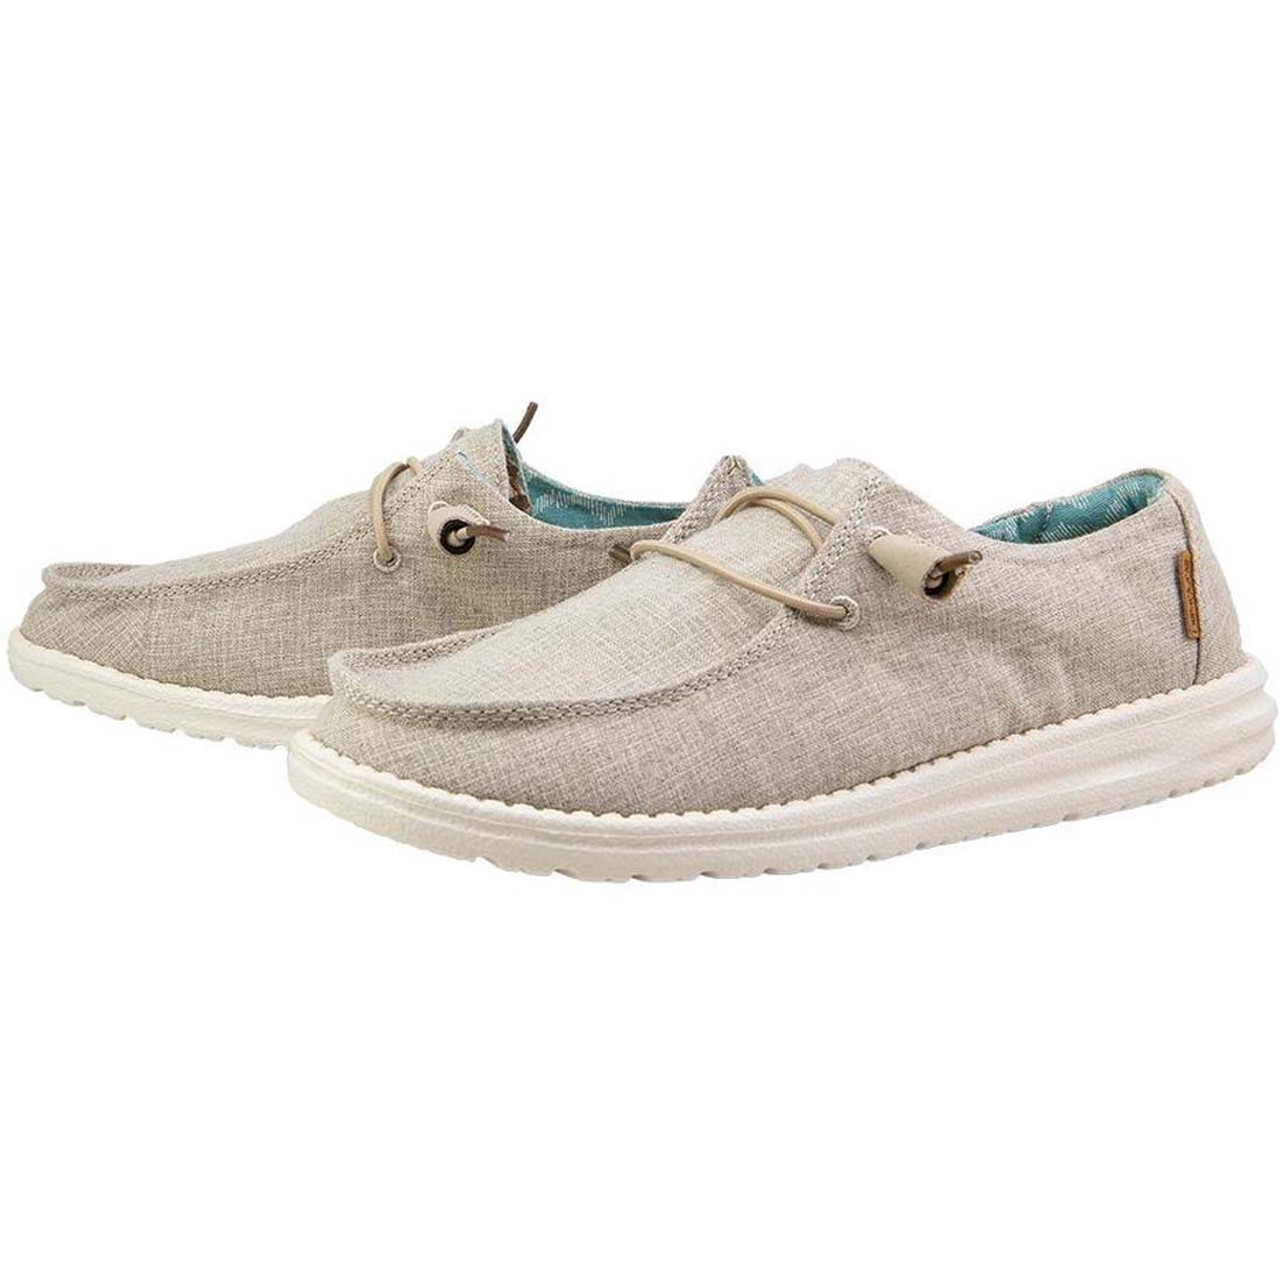 Hey Dude Women's Wendy Linen Shoes - Chambray Biege